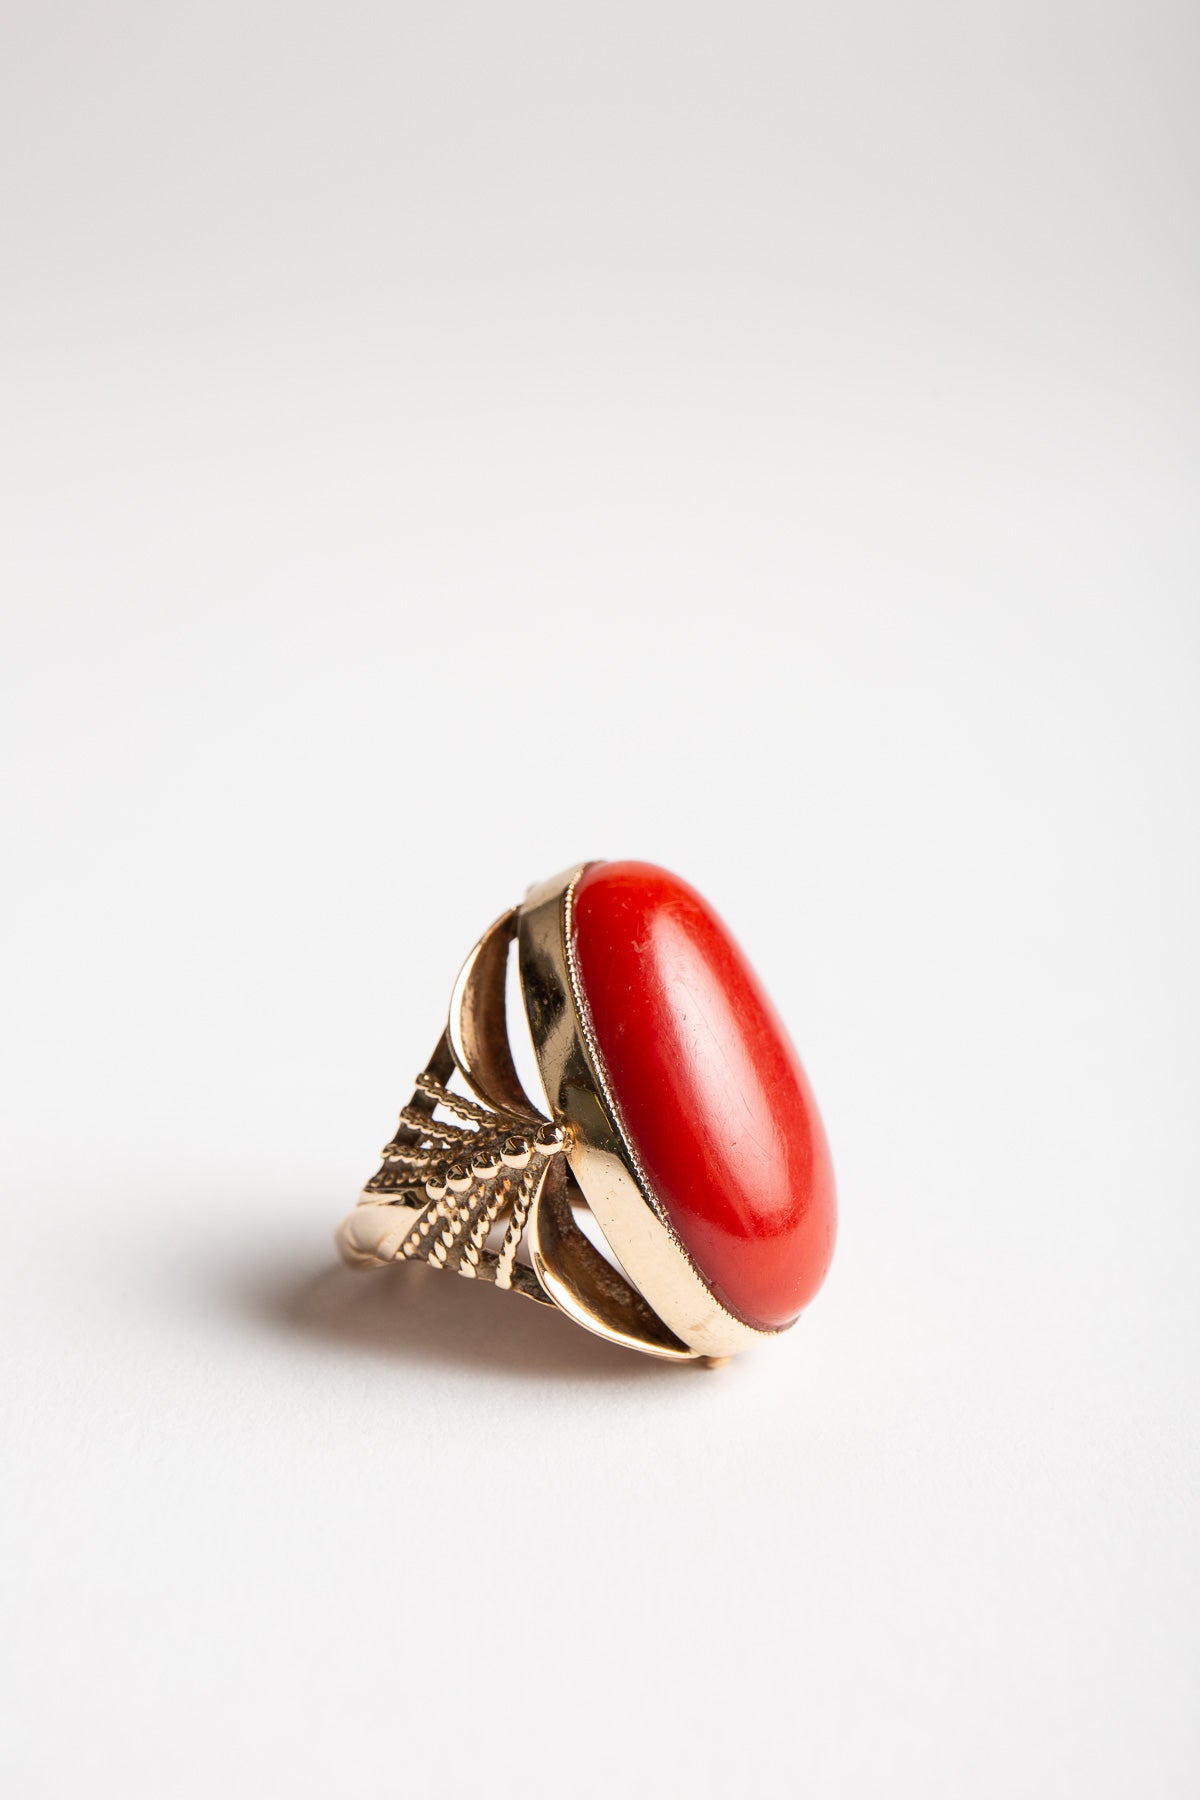 MAXFIELD PRIVATE COLLECTION | 1970'S 18K CORAL RING